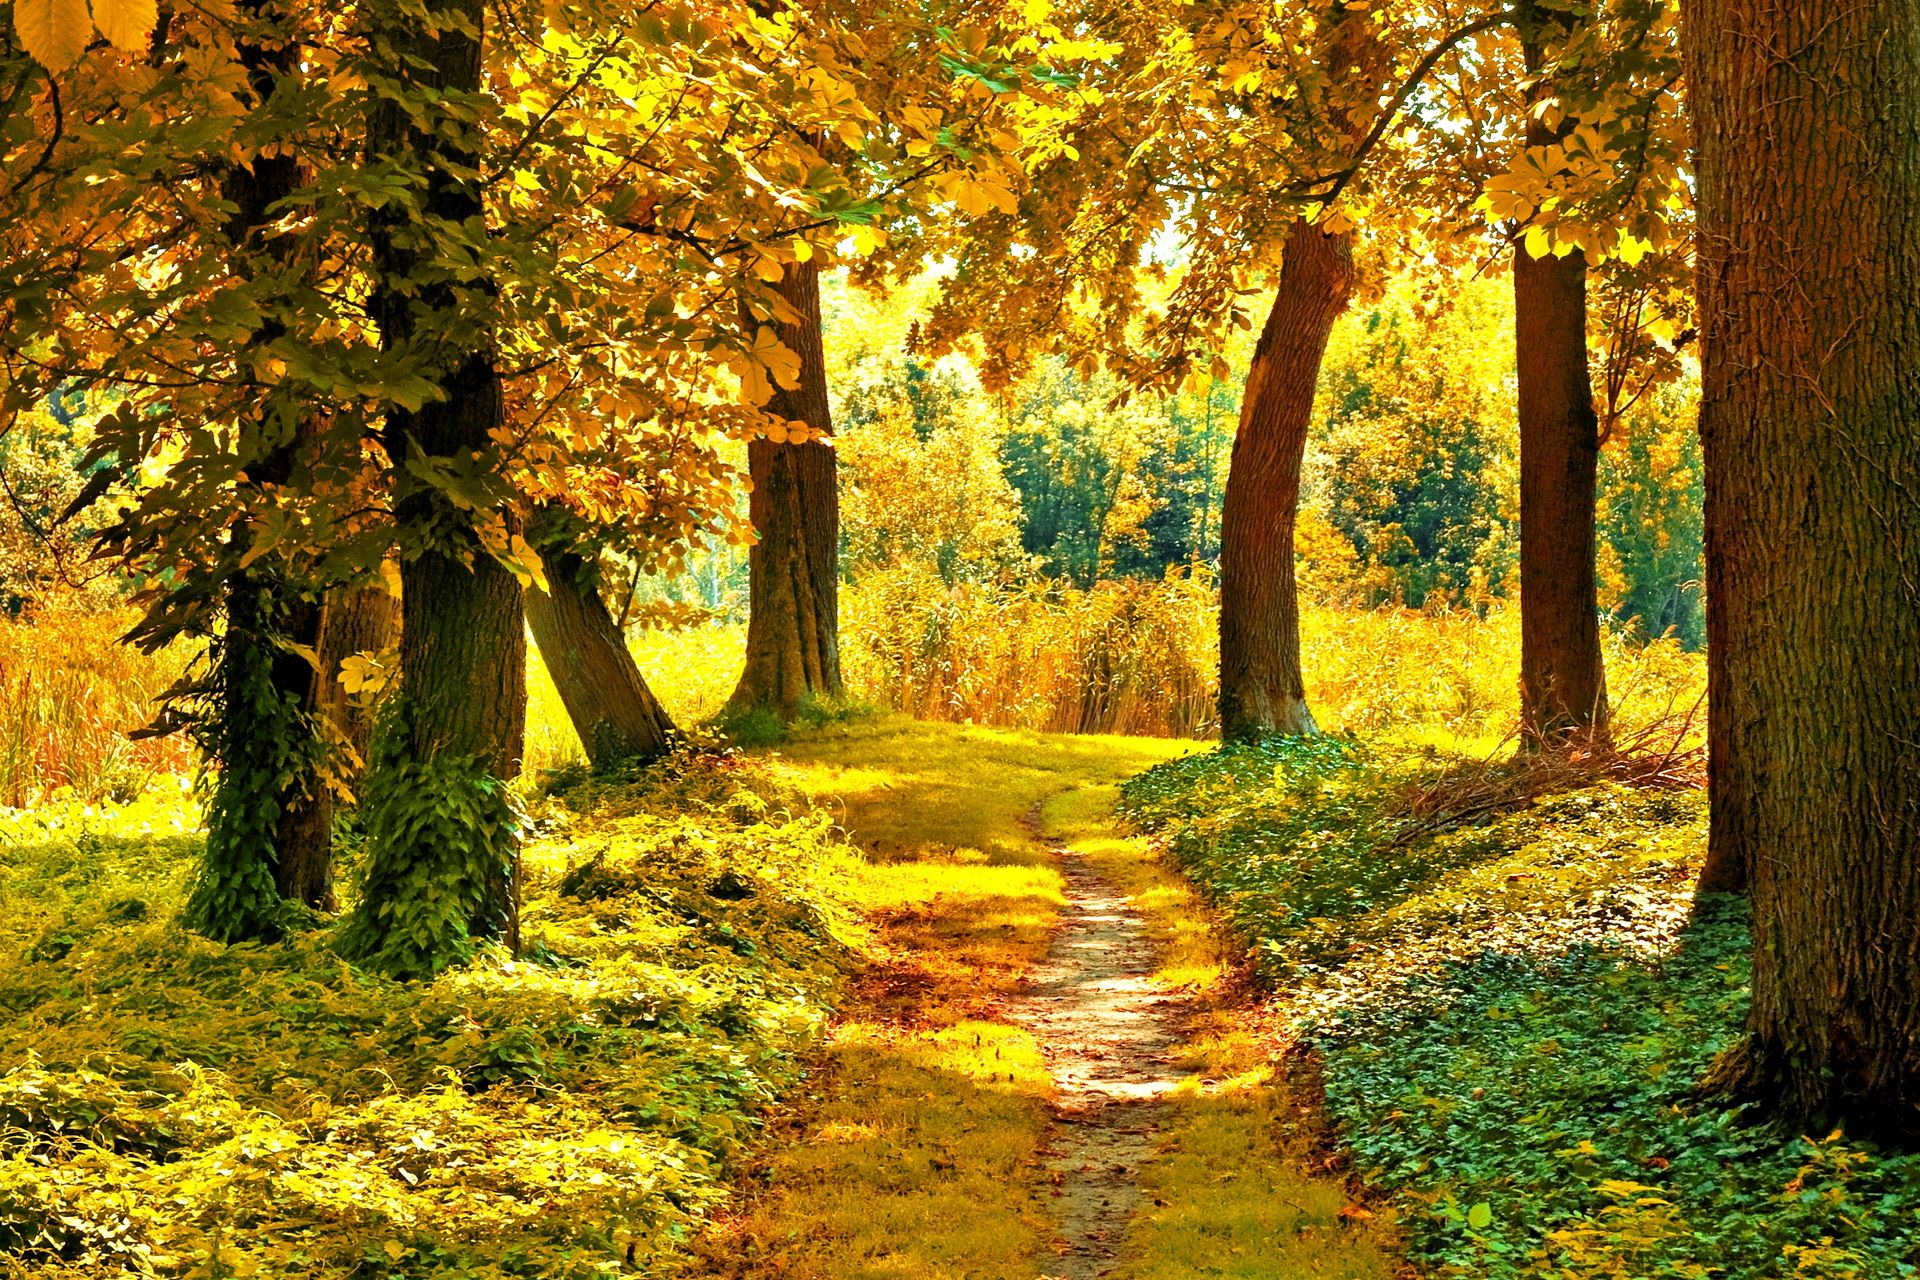 Nature landscapes trees forest path pathway autumn fall seasons wallpaperx1280